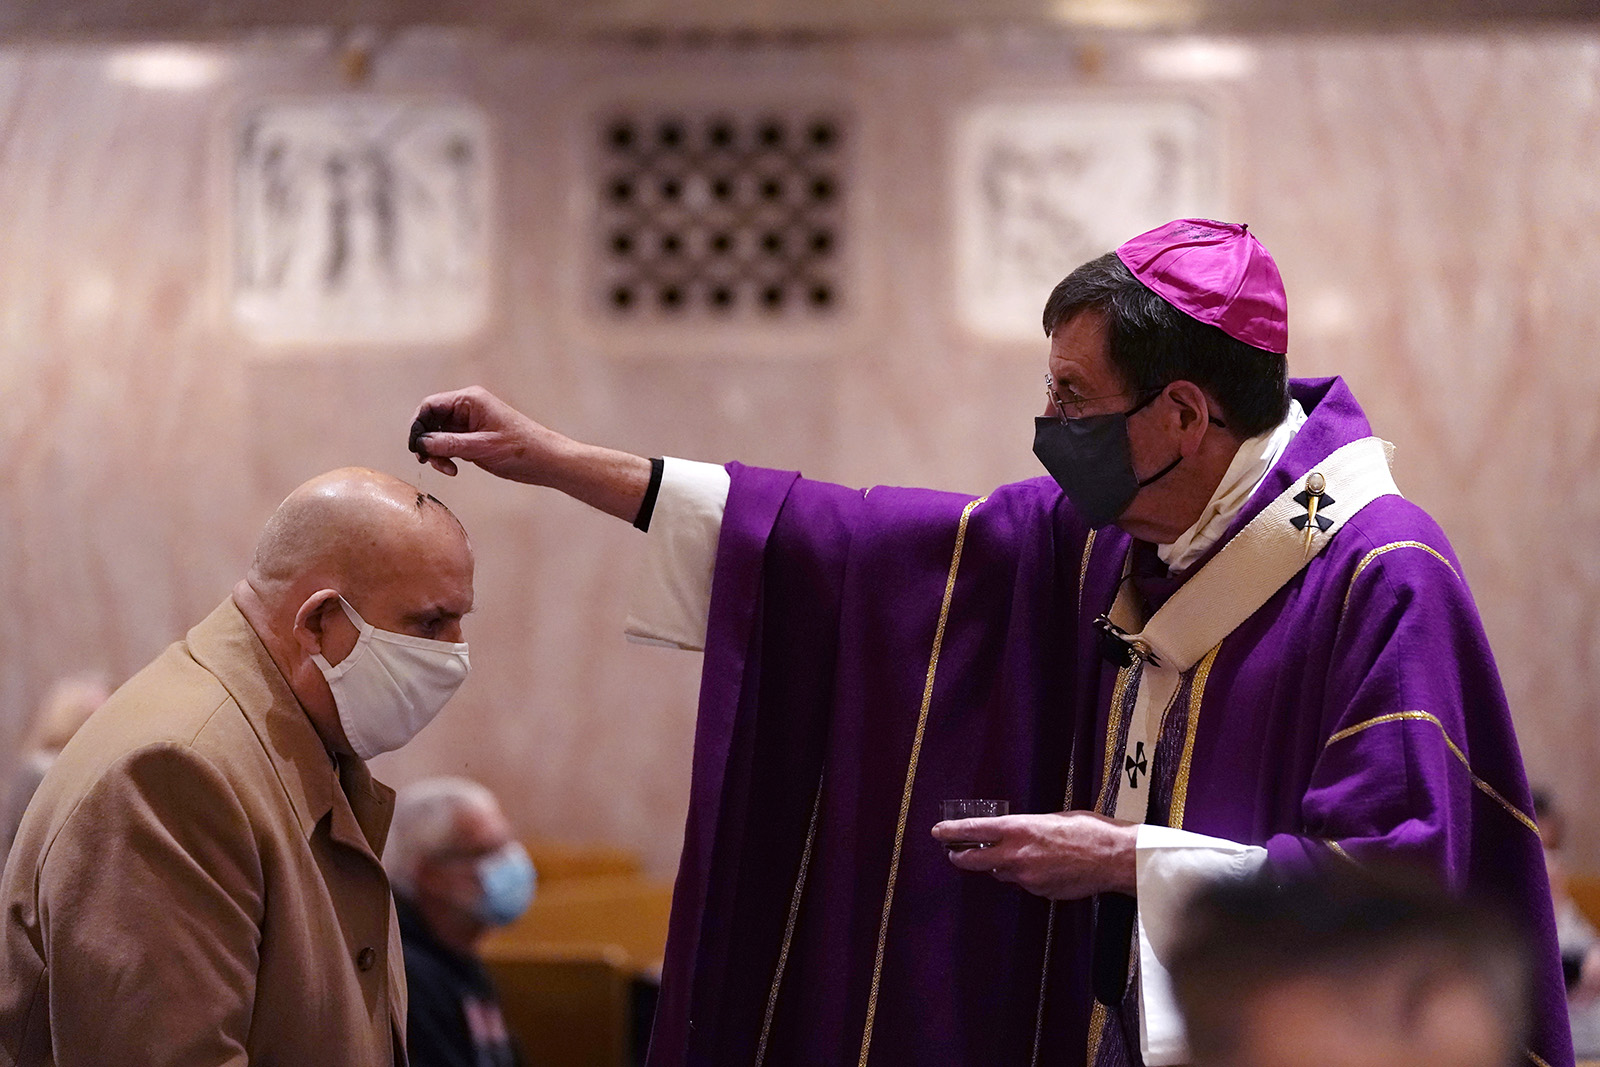 Archbishop of Detroit Allen H. Vigneron sprinkles ashes on Richard Lewandowski at the St. Aloysius Parish, Wednesday, Feb. 17, 2021, in Detroit. The ashes, a symbol of penance, are made from palm leaves used in last year's Palm Sunday liturgy. The sprinkling, because of the pandemic, is a departure from the usual practice of making the sign of the cross on the forehead and follows an ancient method still common in parts of the world today. (AP Photo/Carlos Osorio)